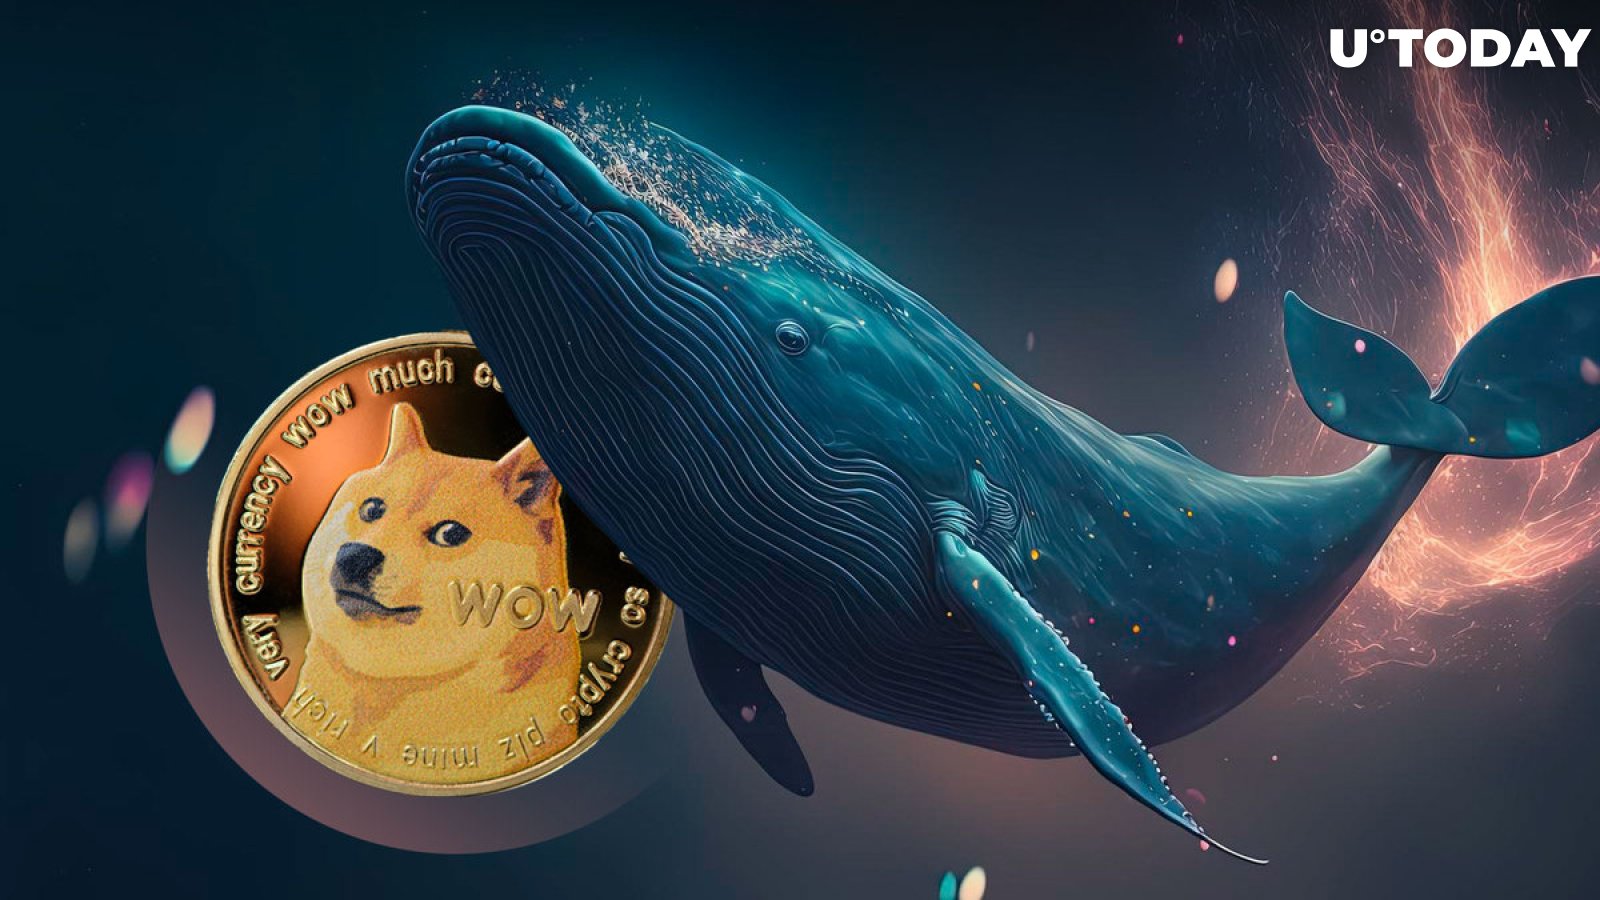 990,000,000 Dogecoin Exchange Hands, DOGE Community Abuzz